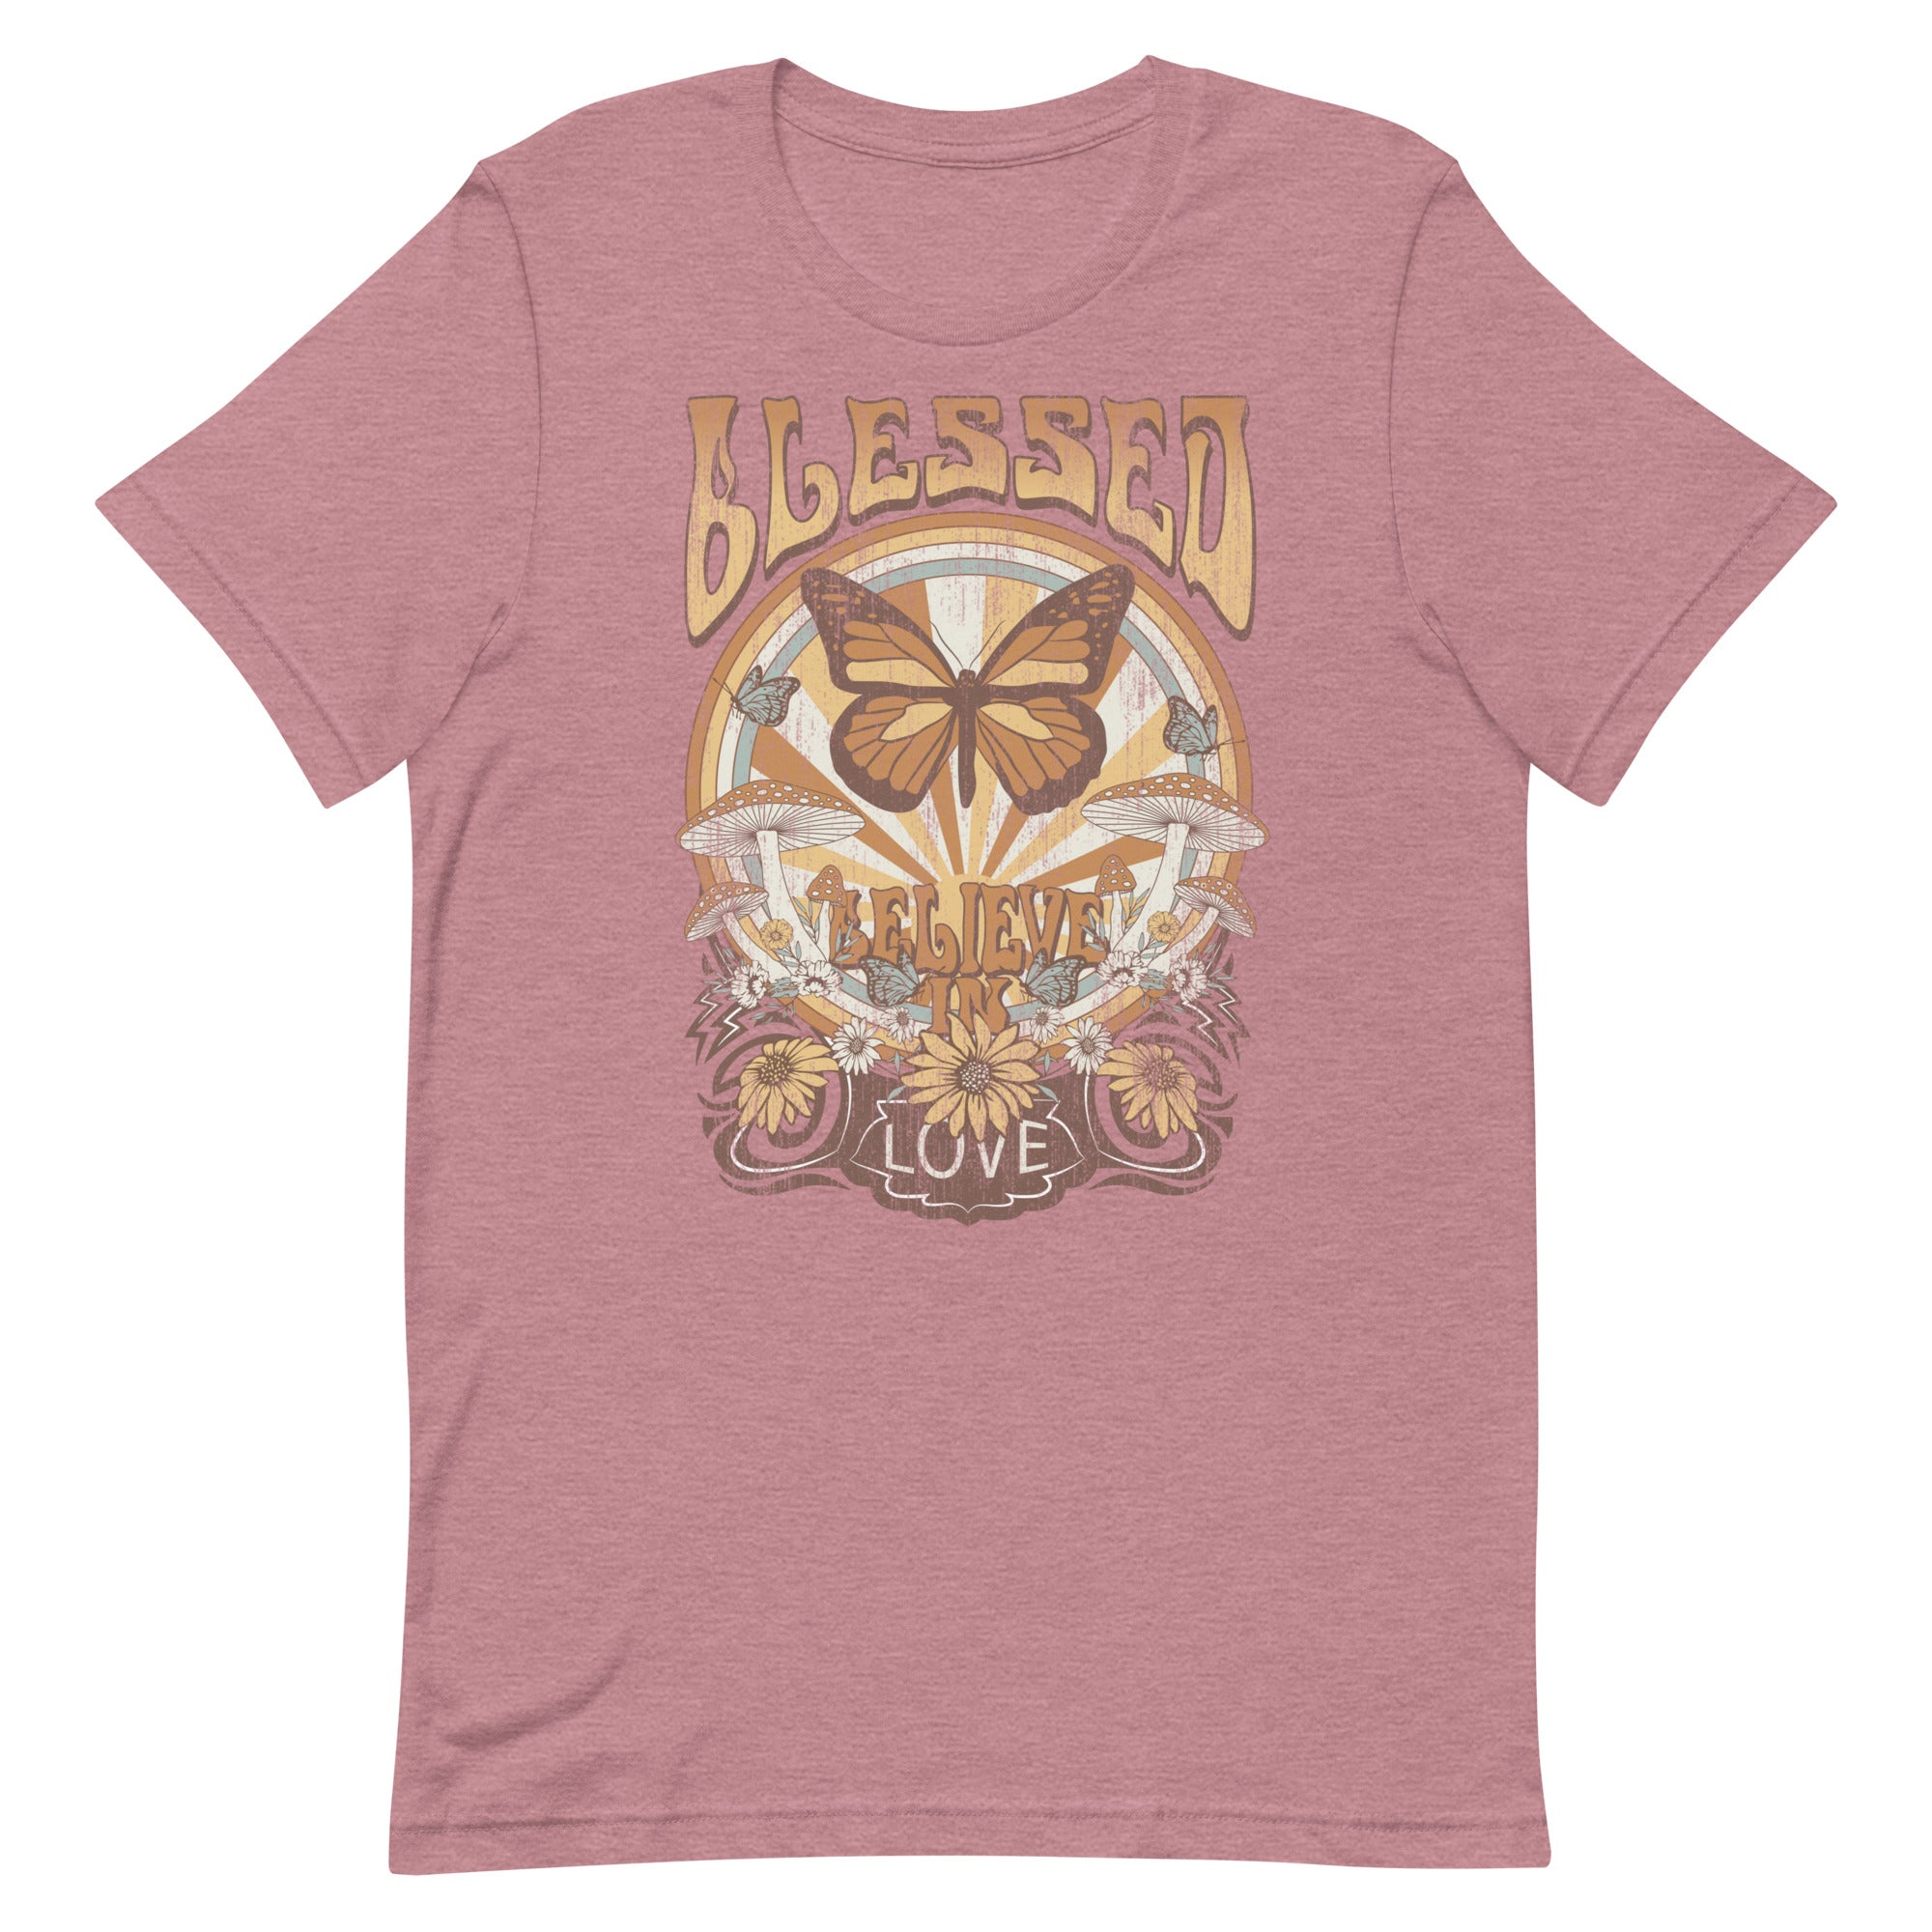 Blessed - Believe In Love Graphic Tee